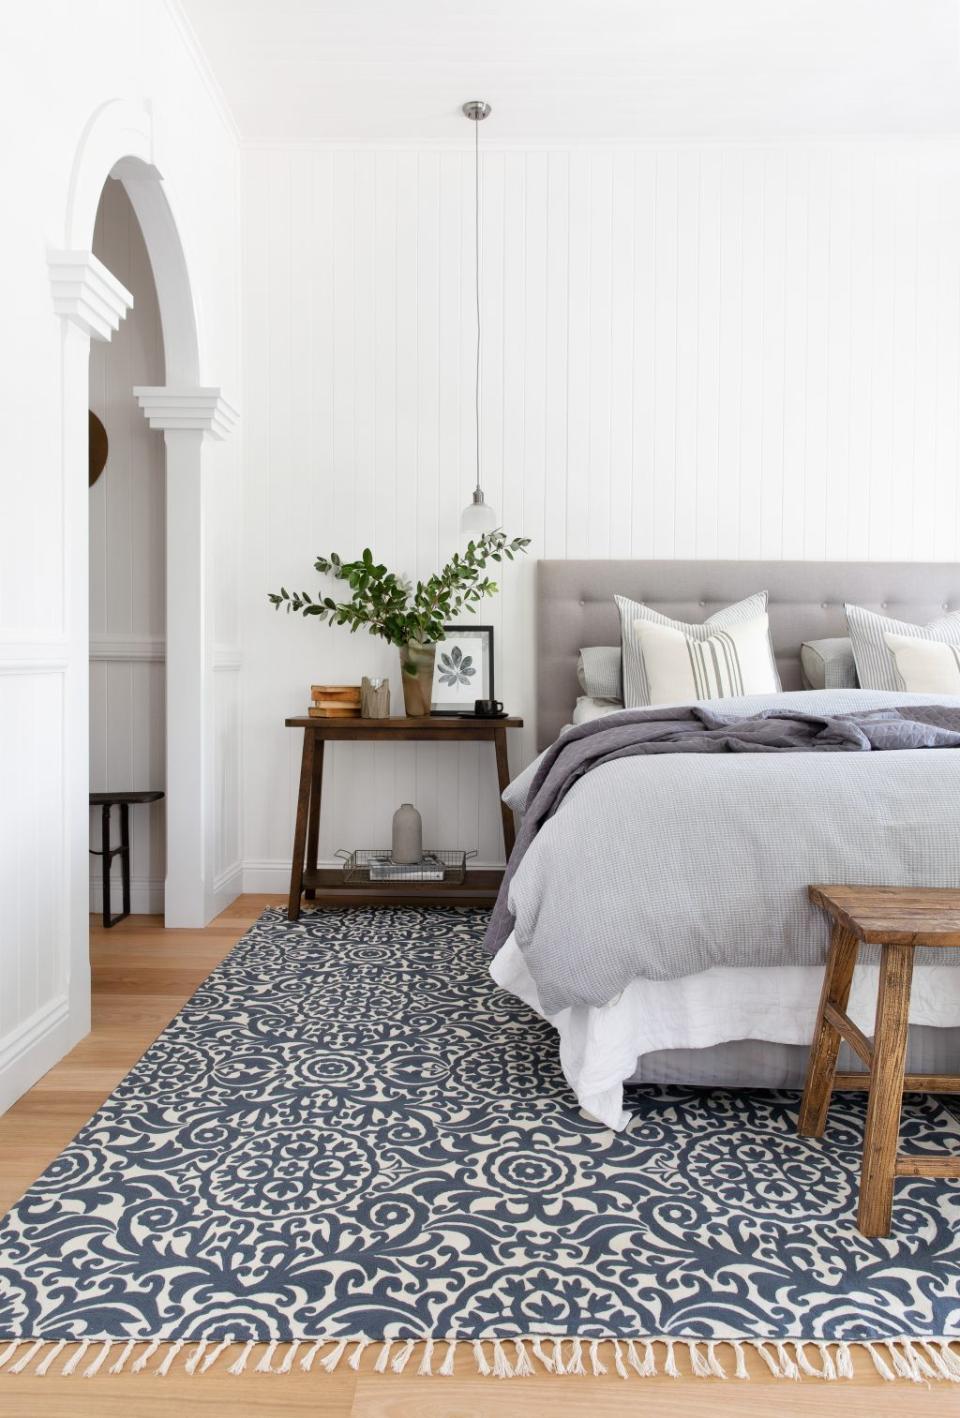 Add pattern to your bedroom floor with a rug